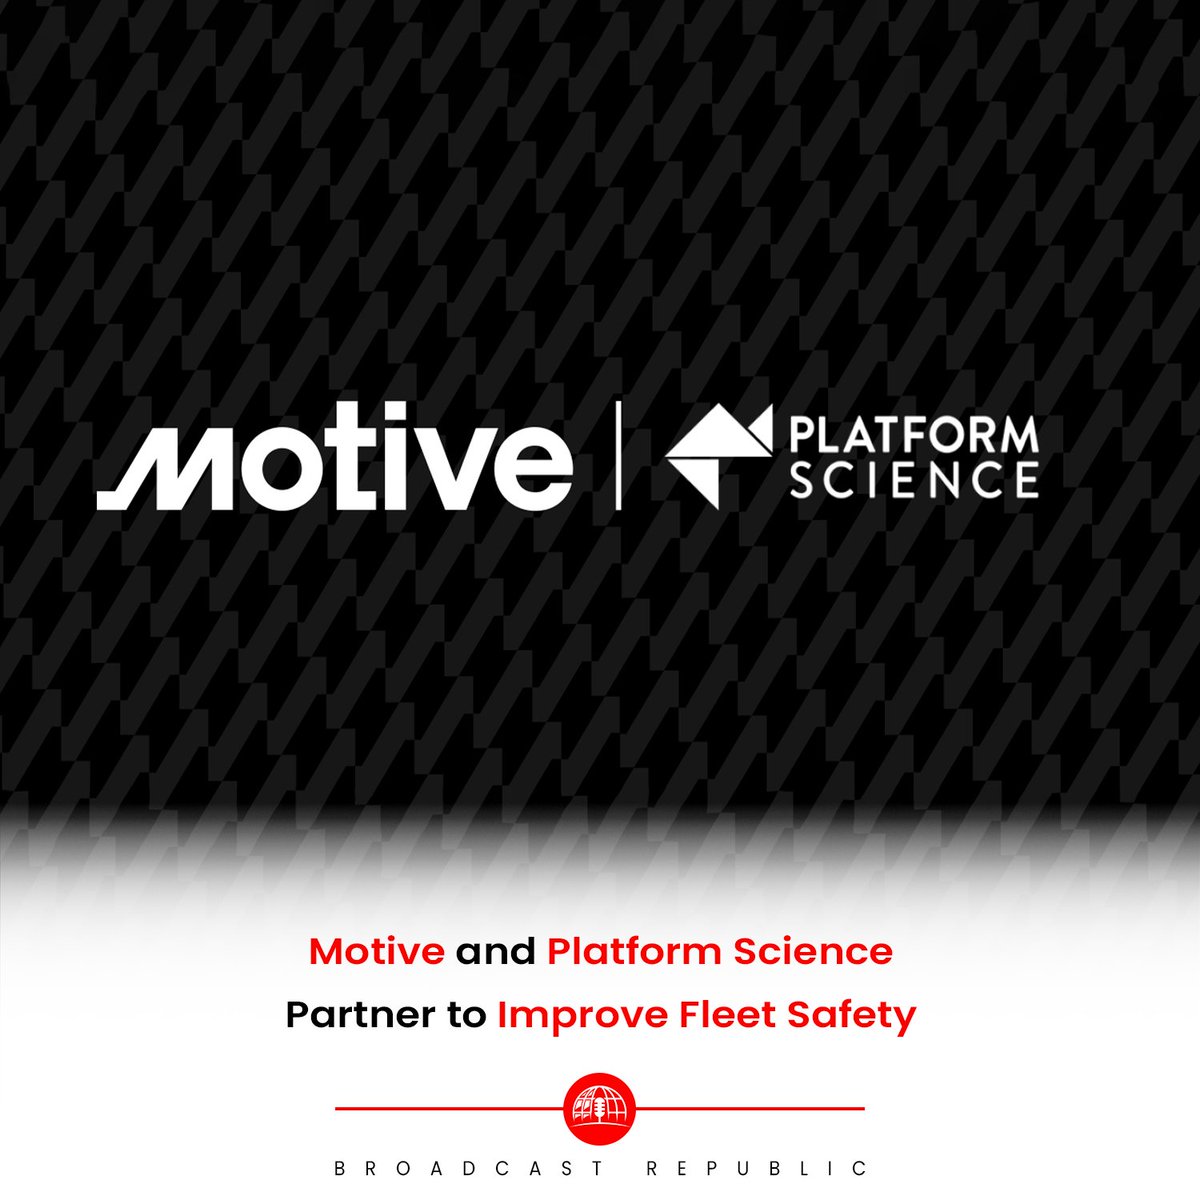 Motive and Platform Science have teamed up to improve fleet safety, productivity, and profitability for businesses. 

#BroadcastRepublic #Motive #PlatformScience #FleetSafety #Telematics #AI #DashCams #Data #Transportation #Efficiency #Collaboration #Innovation